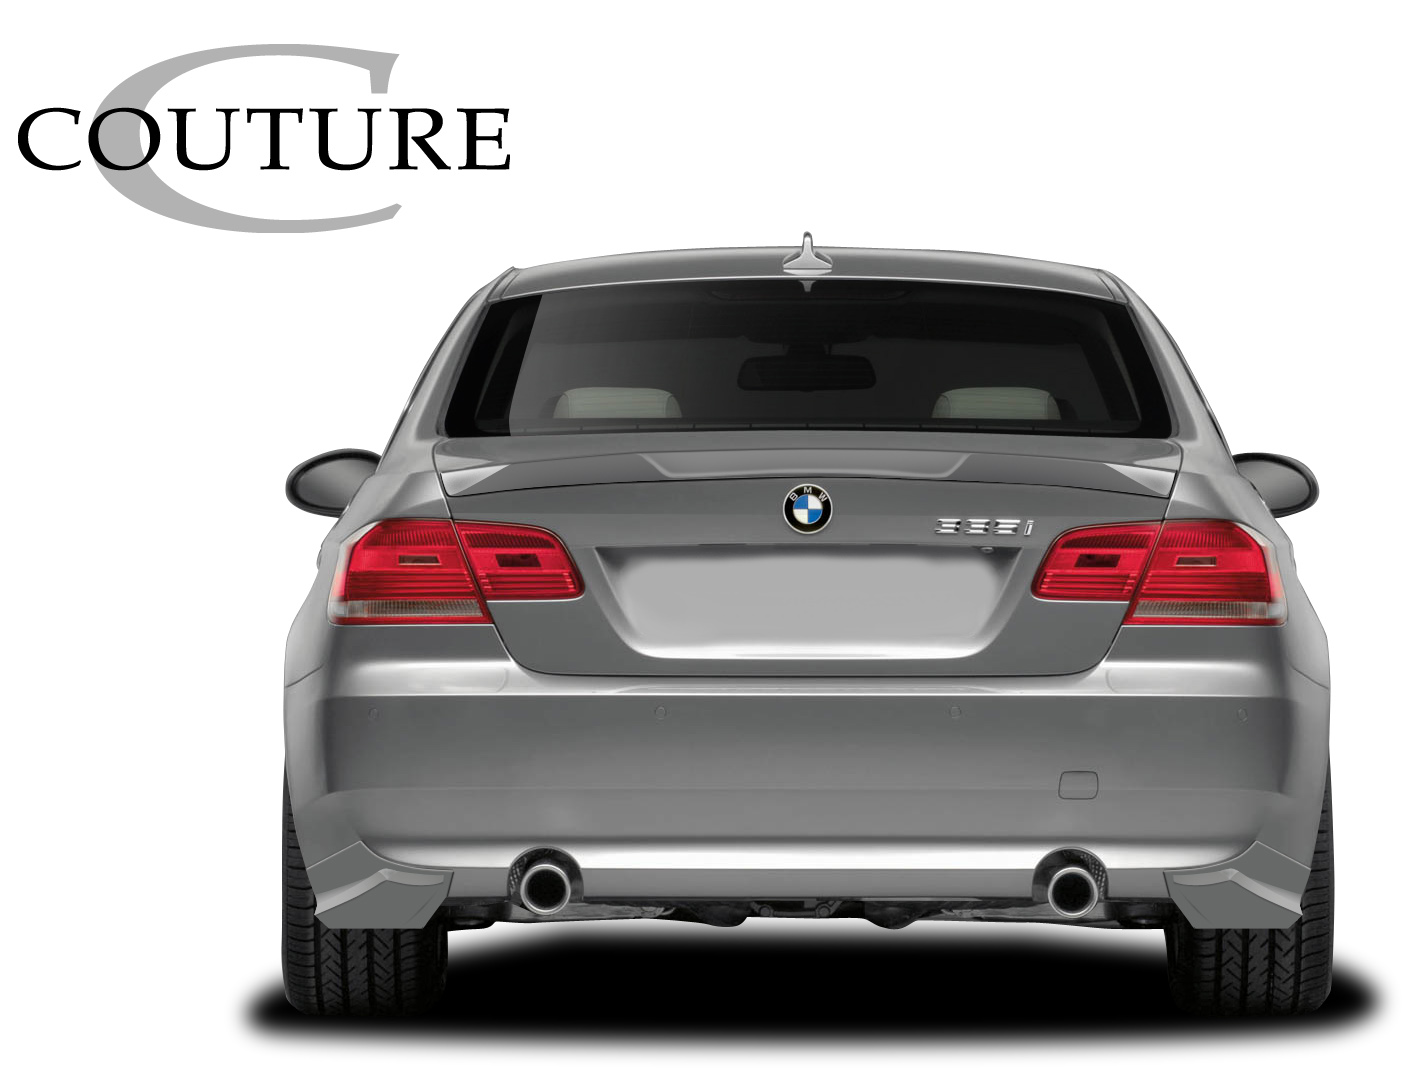 Polyurethane Wing Spoiler Bodykit for 2007 BMW 3 Series 2DR - 2007-2013 BMW 3 Series M3 E92 2DR Couture Vortex Wing Trunk Lid Spoiler - 1 Piece